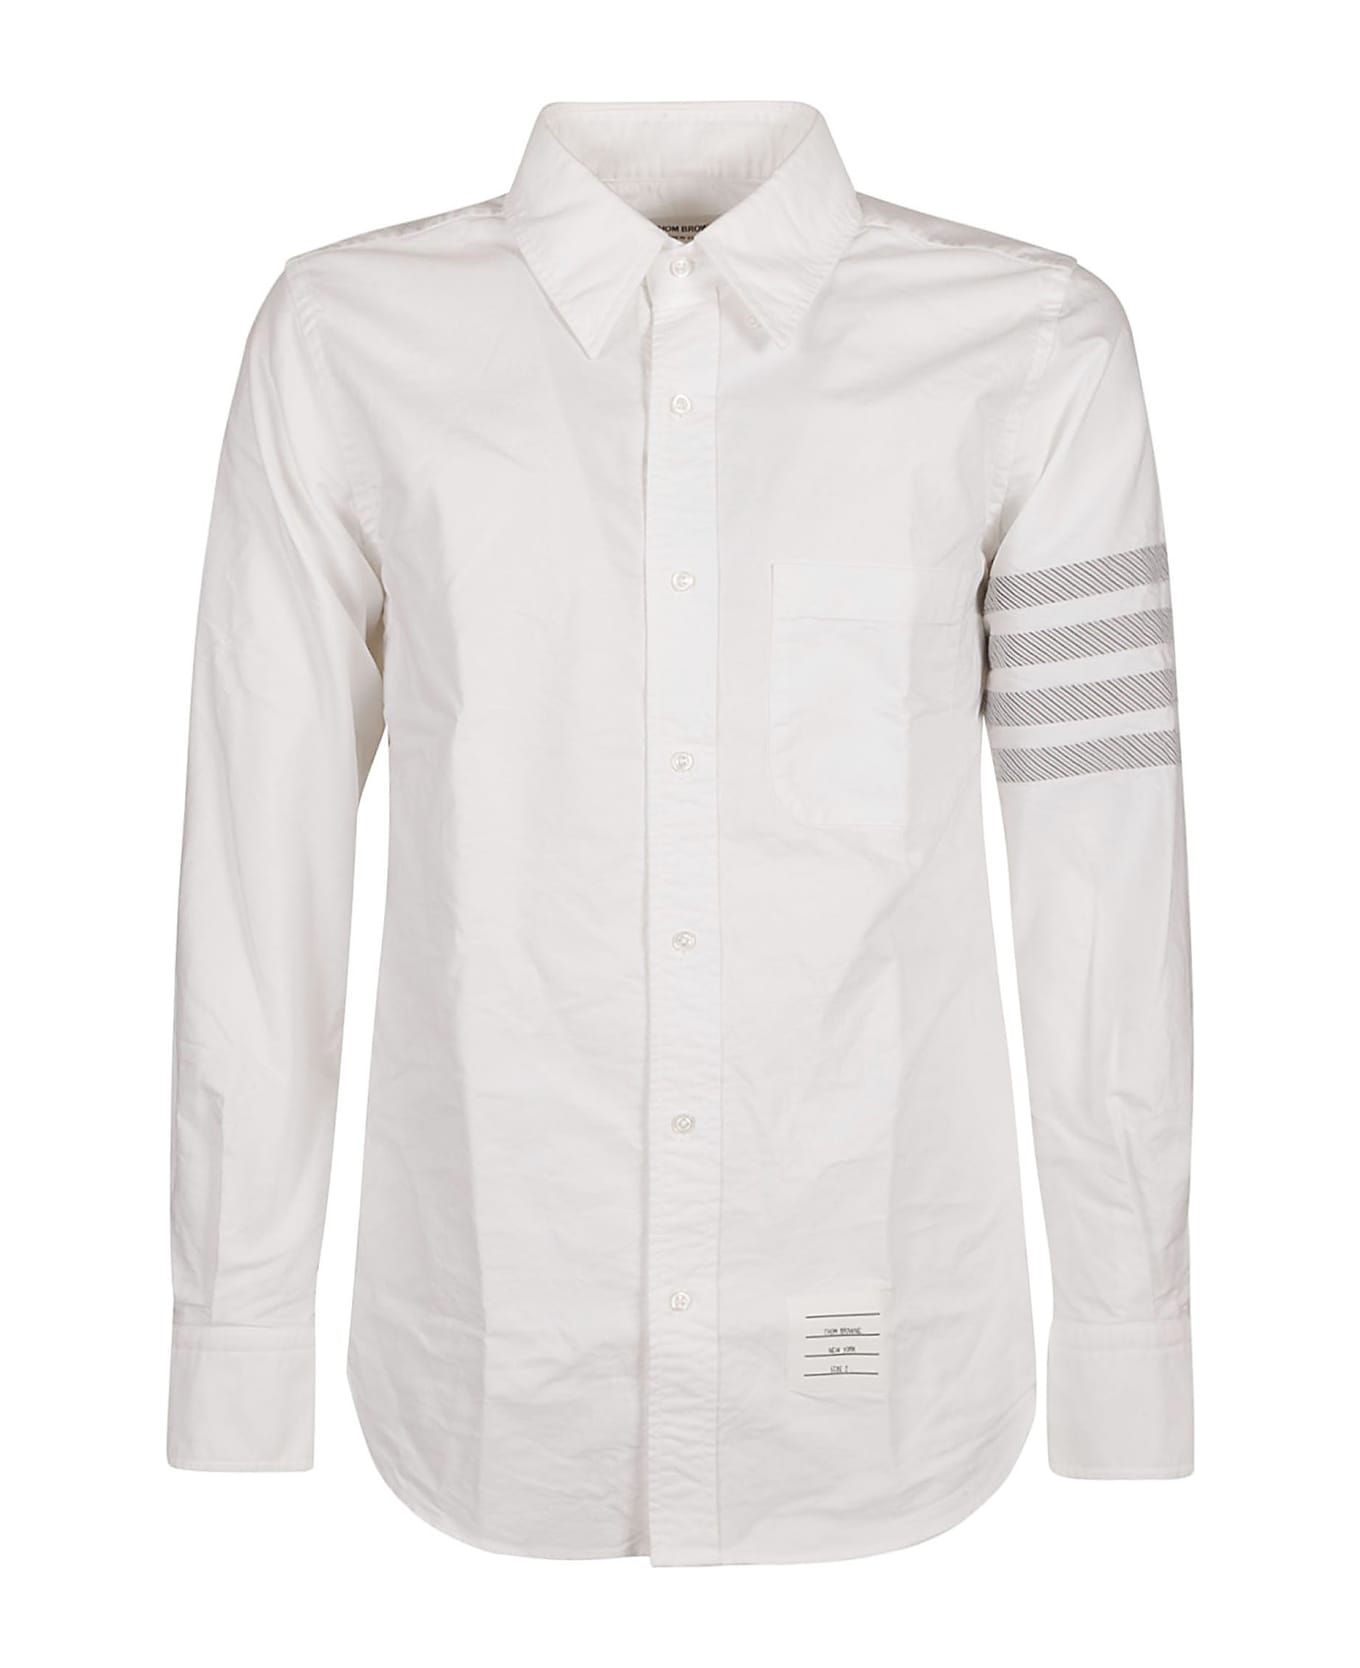 Thom Browne Straight Fit Button Down Shirt - White